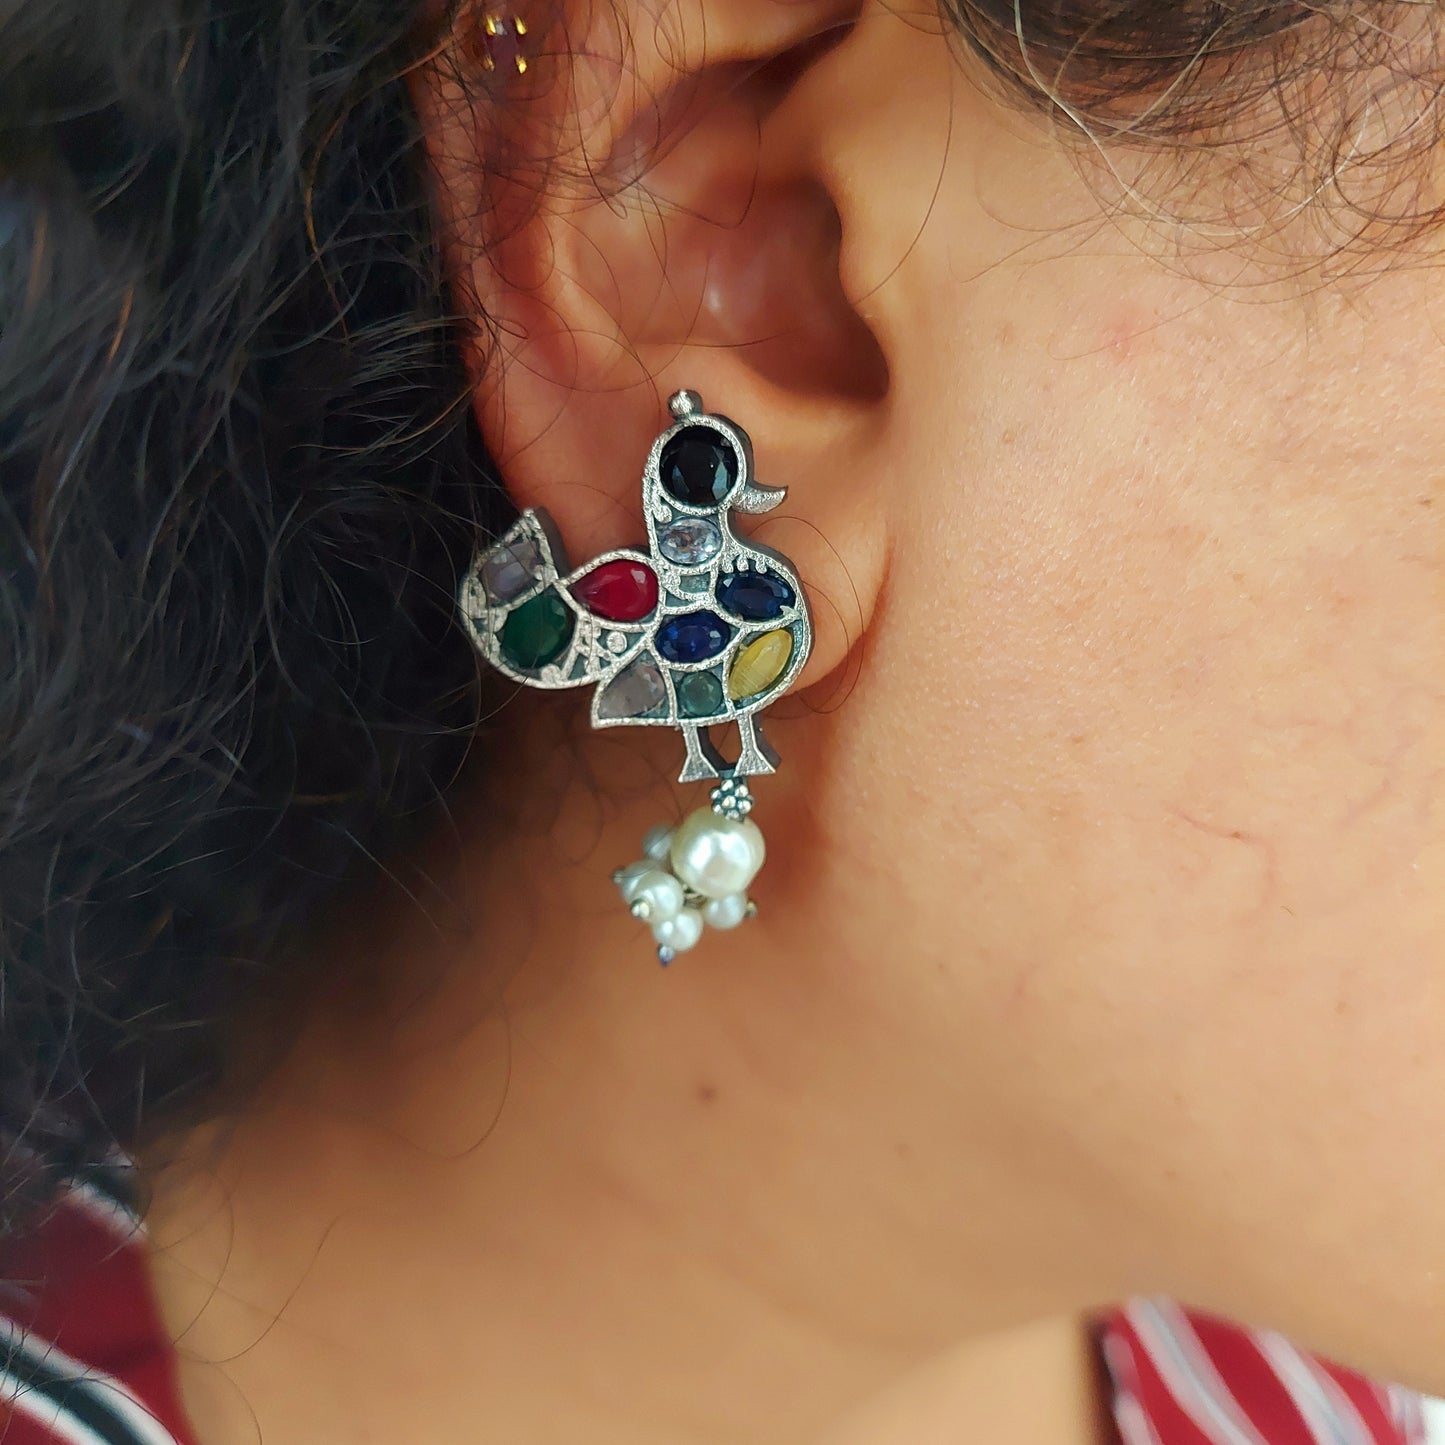 "Feathered Fantasia" Earrings. Silver-Toned Birds Adorned with Multicolored Stones and Pearl Danglers